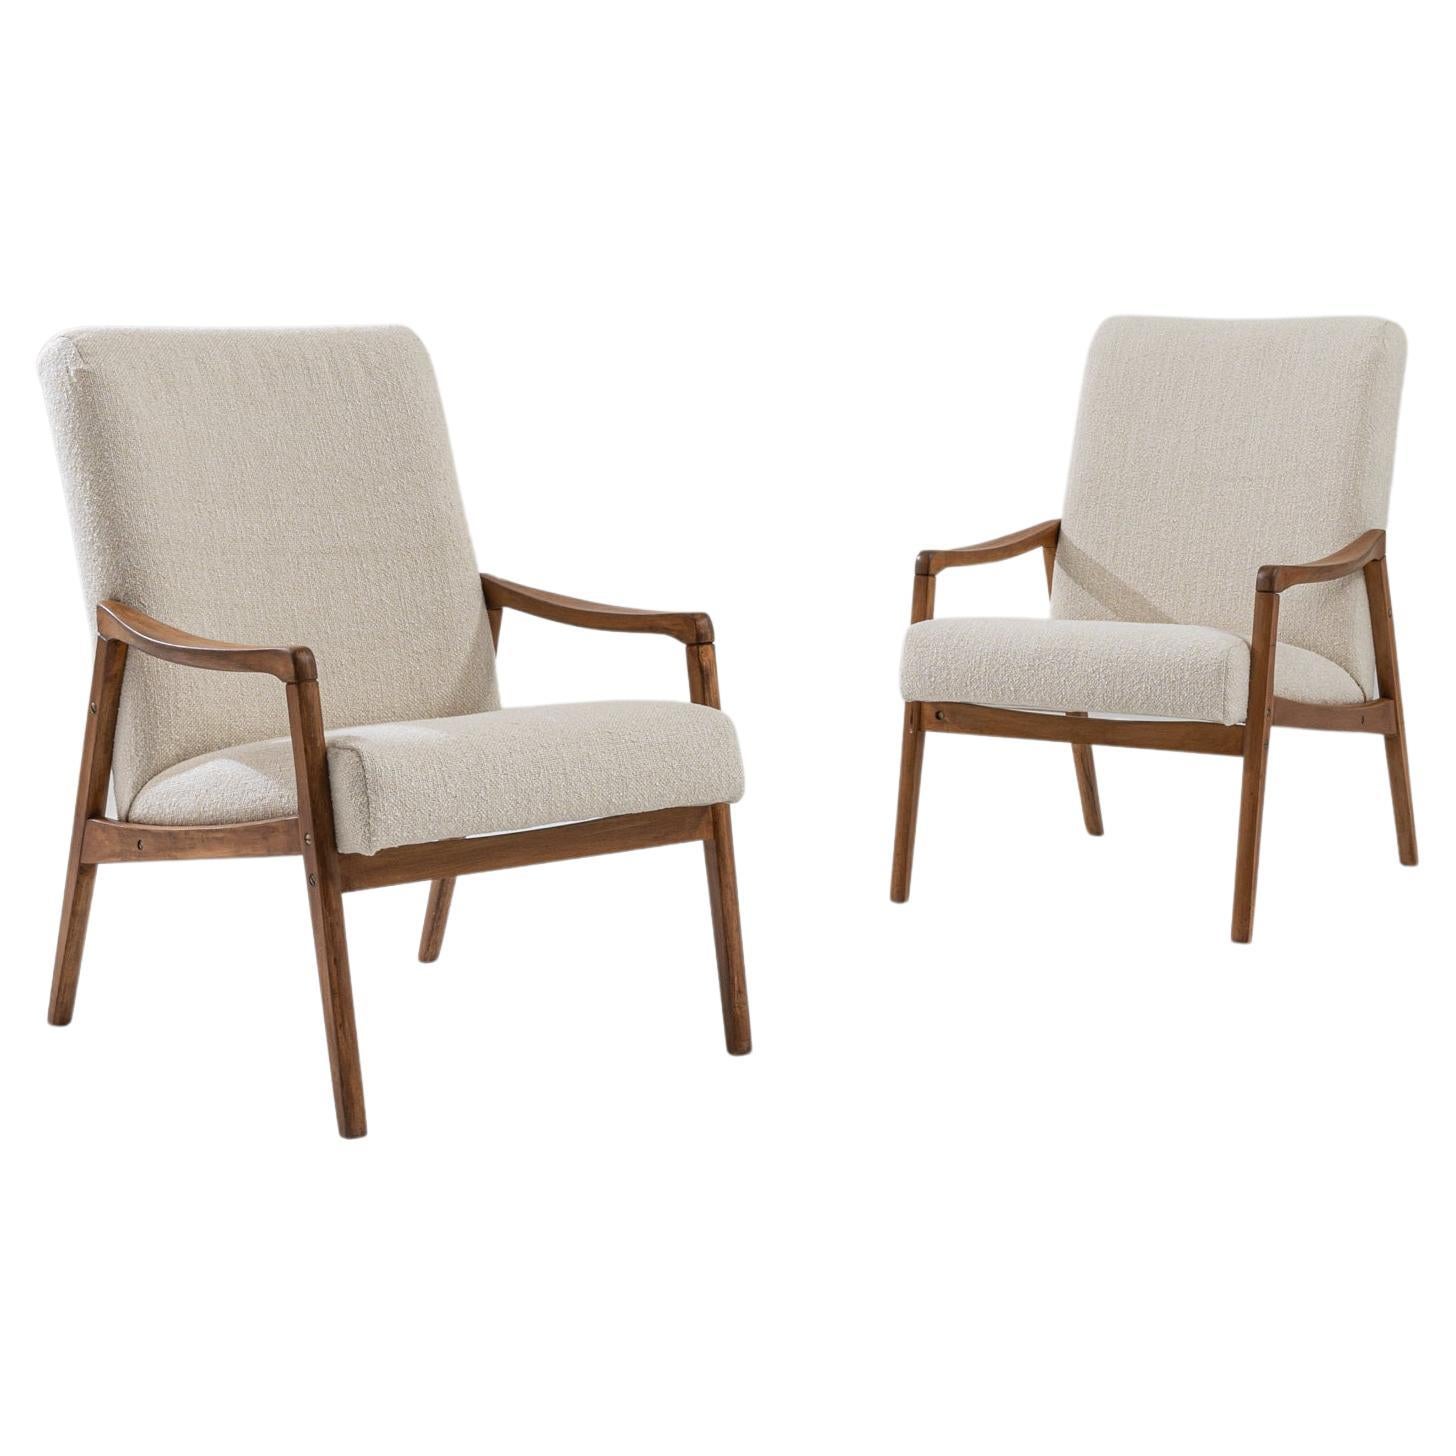 1960s Czechia Pair of Wooden Armchairs